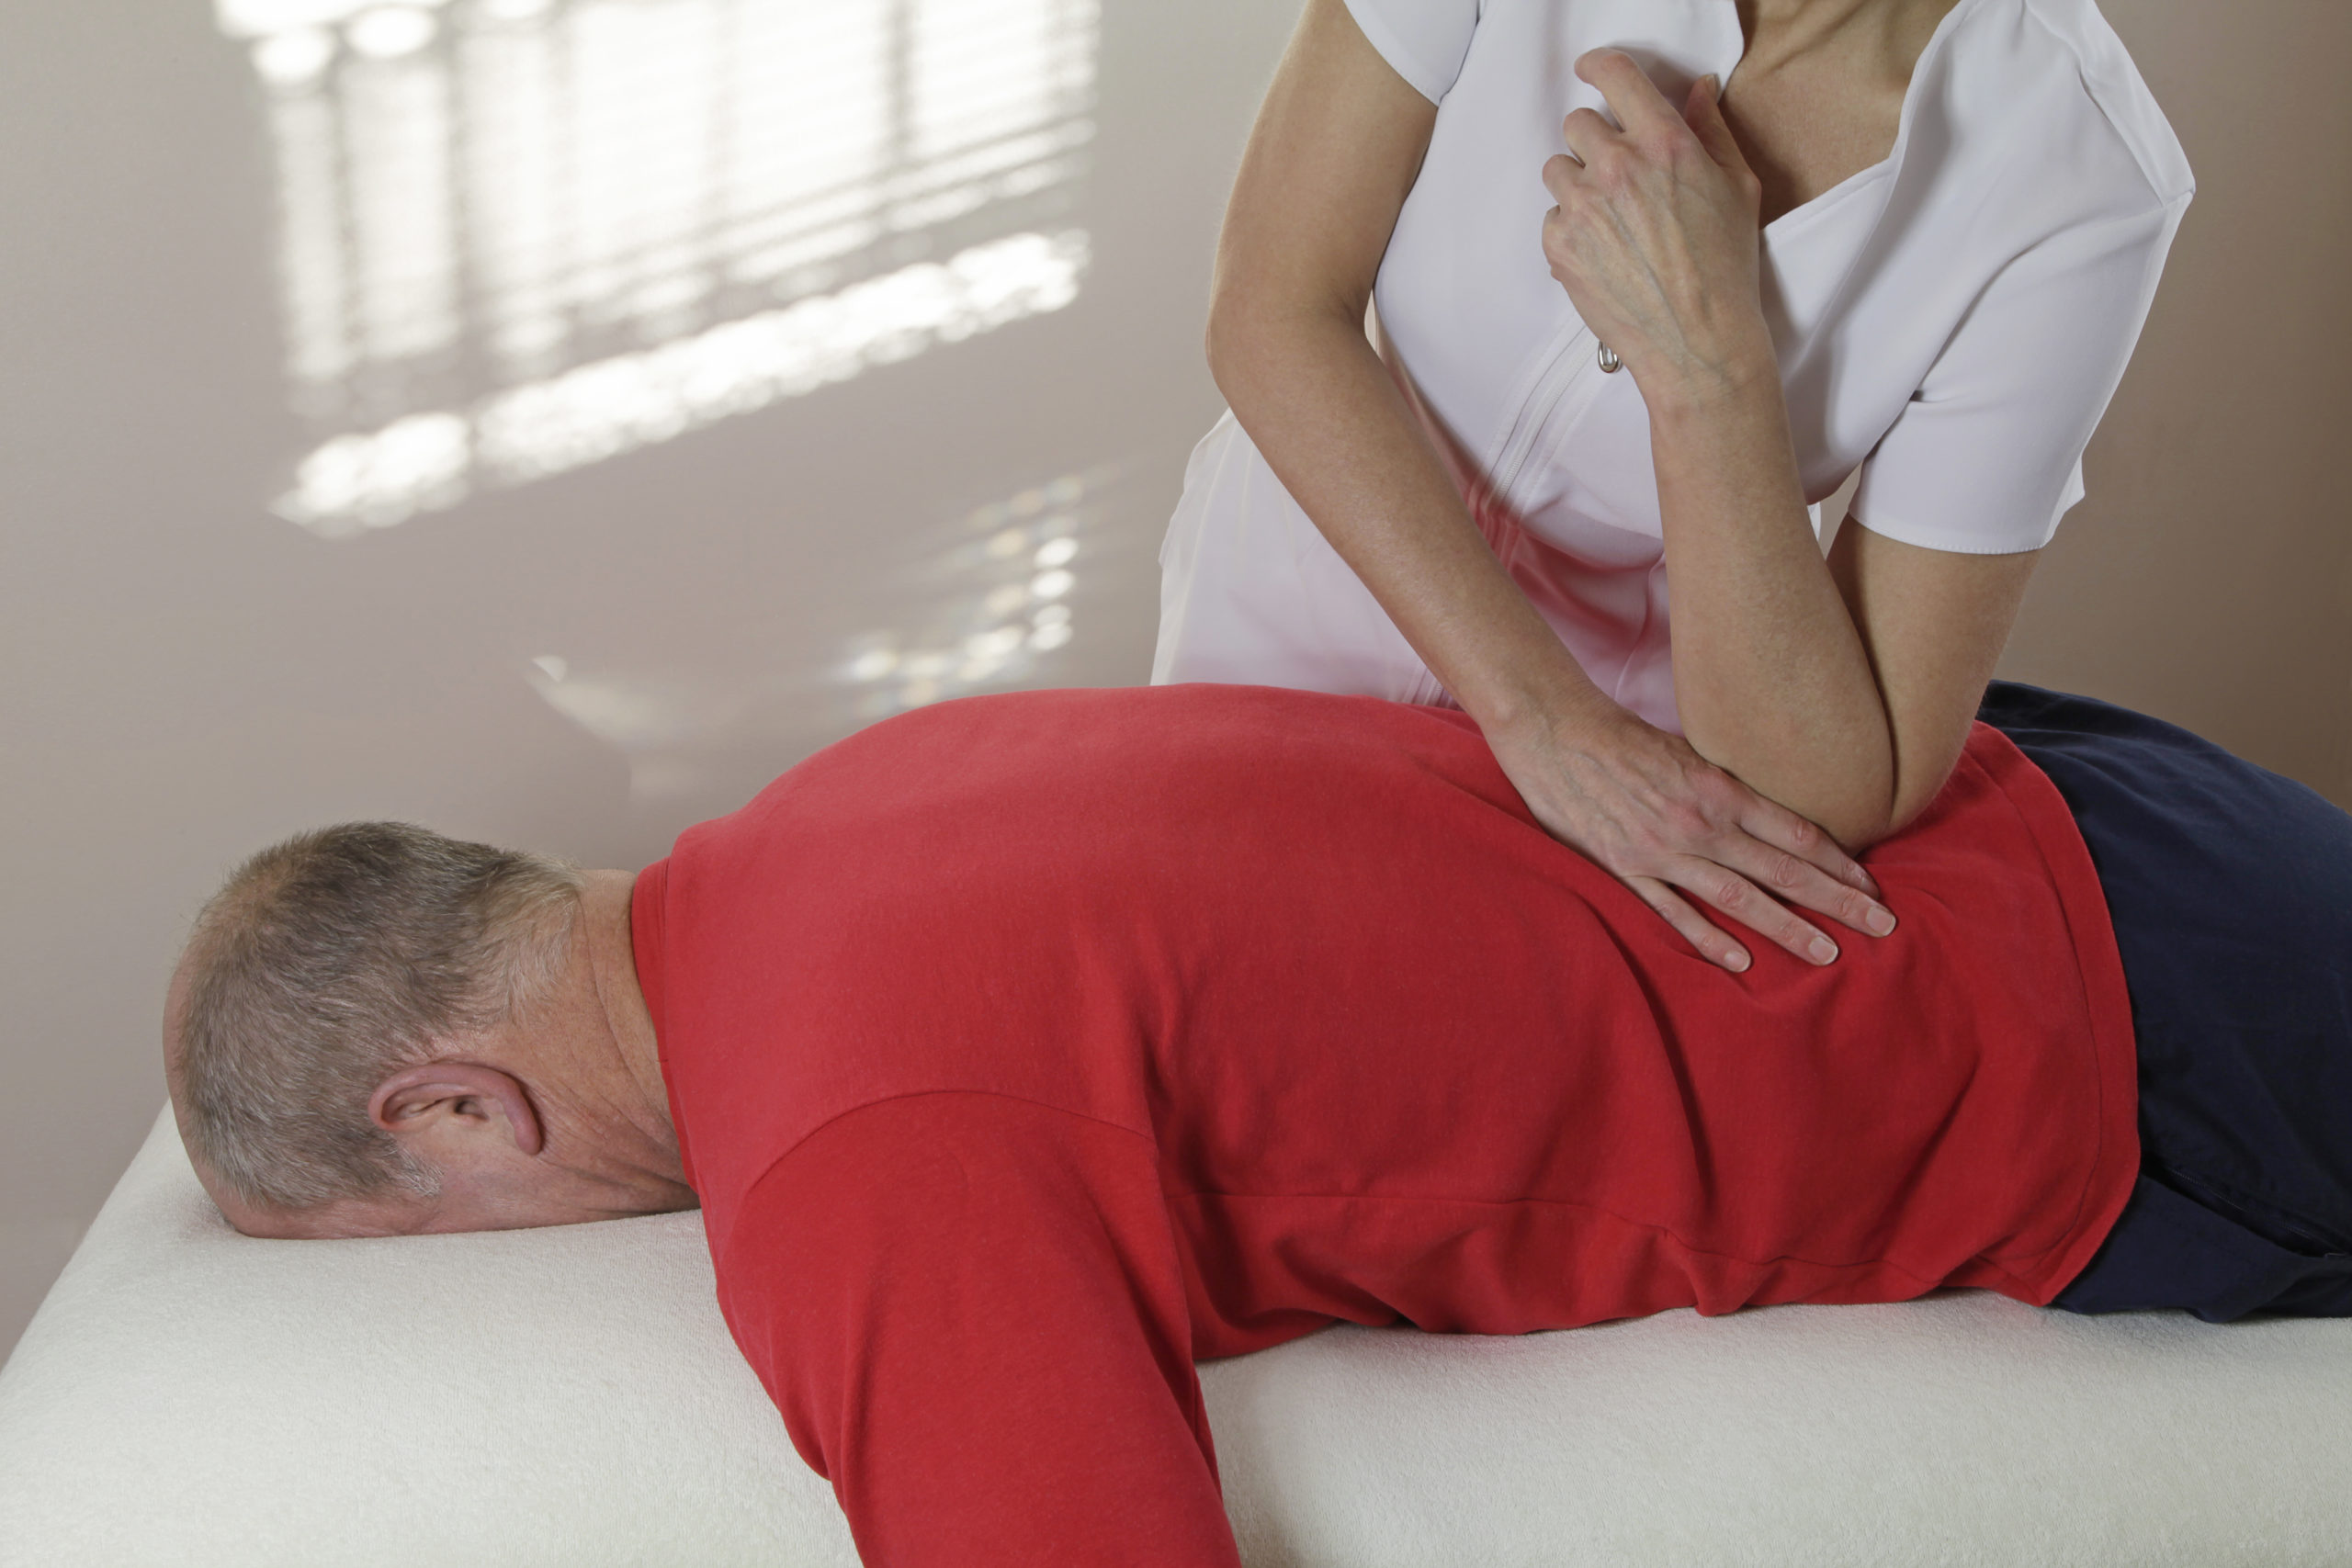 Massage therapist pressing elbow into back